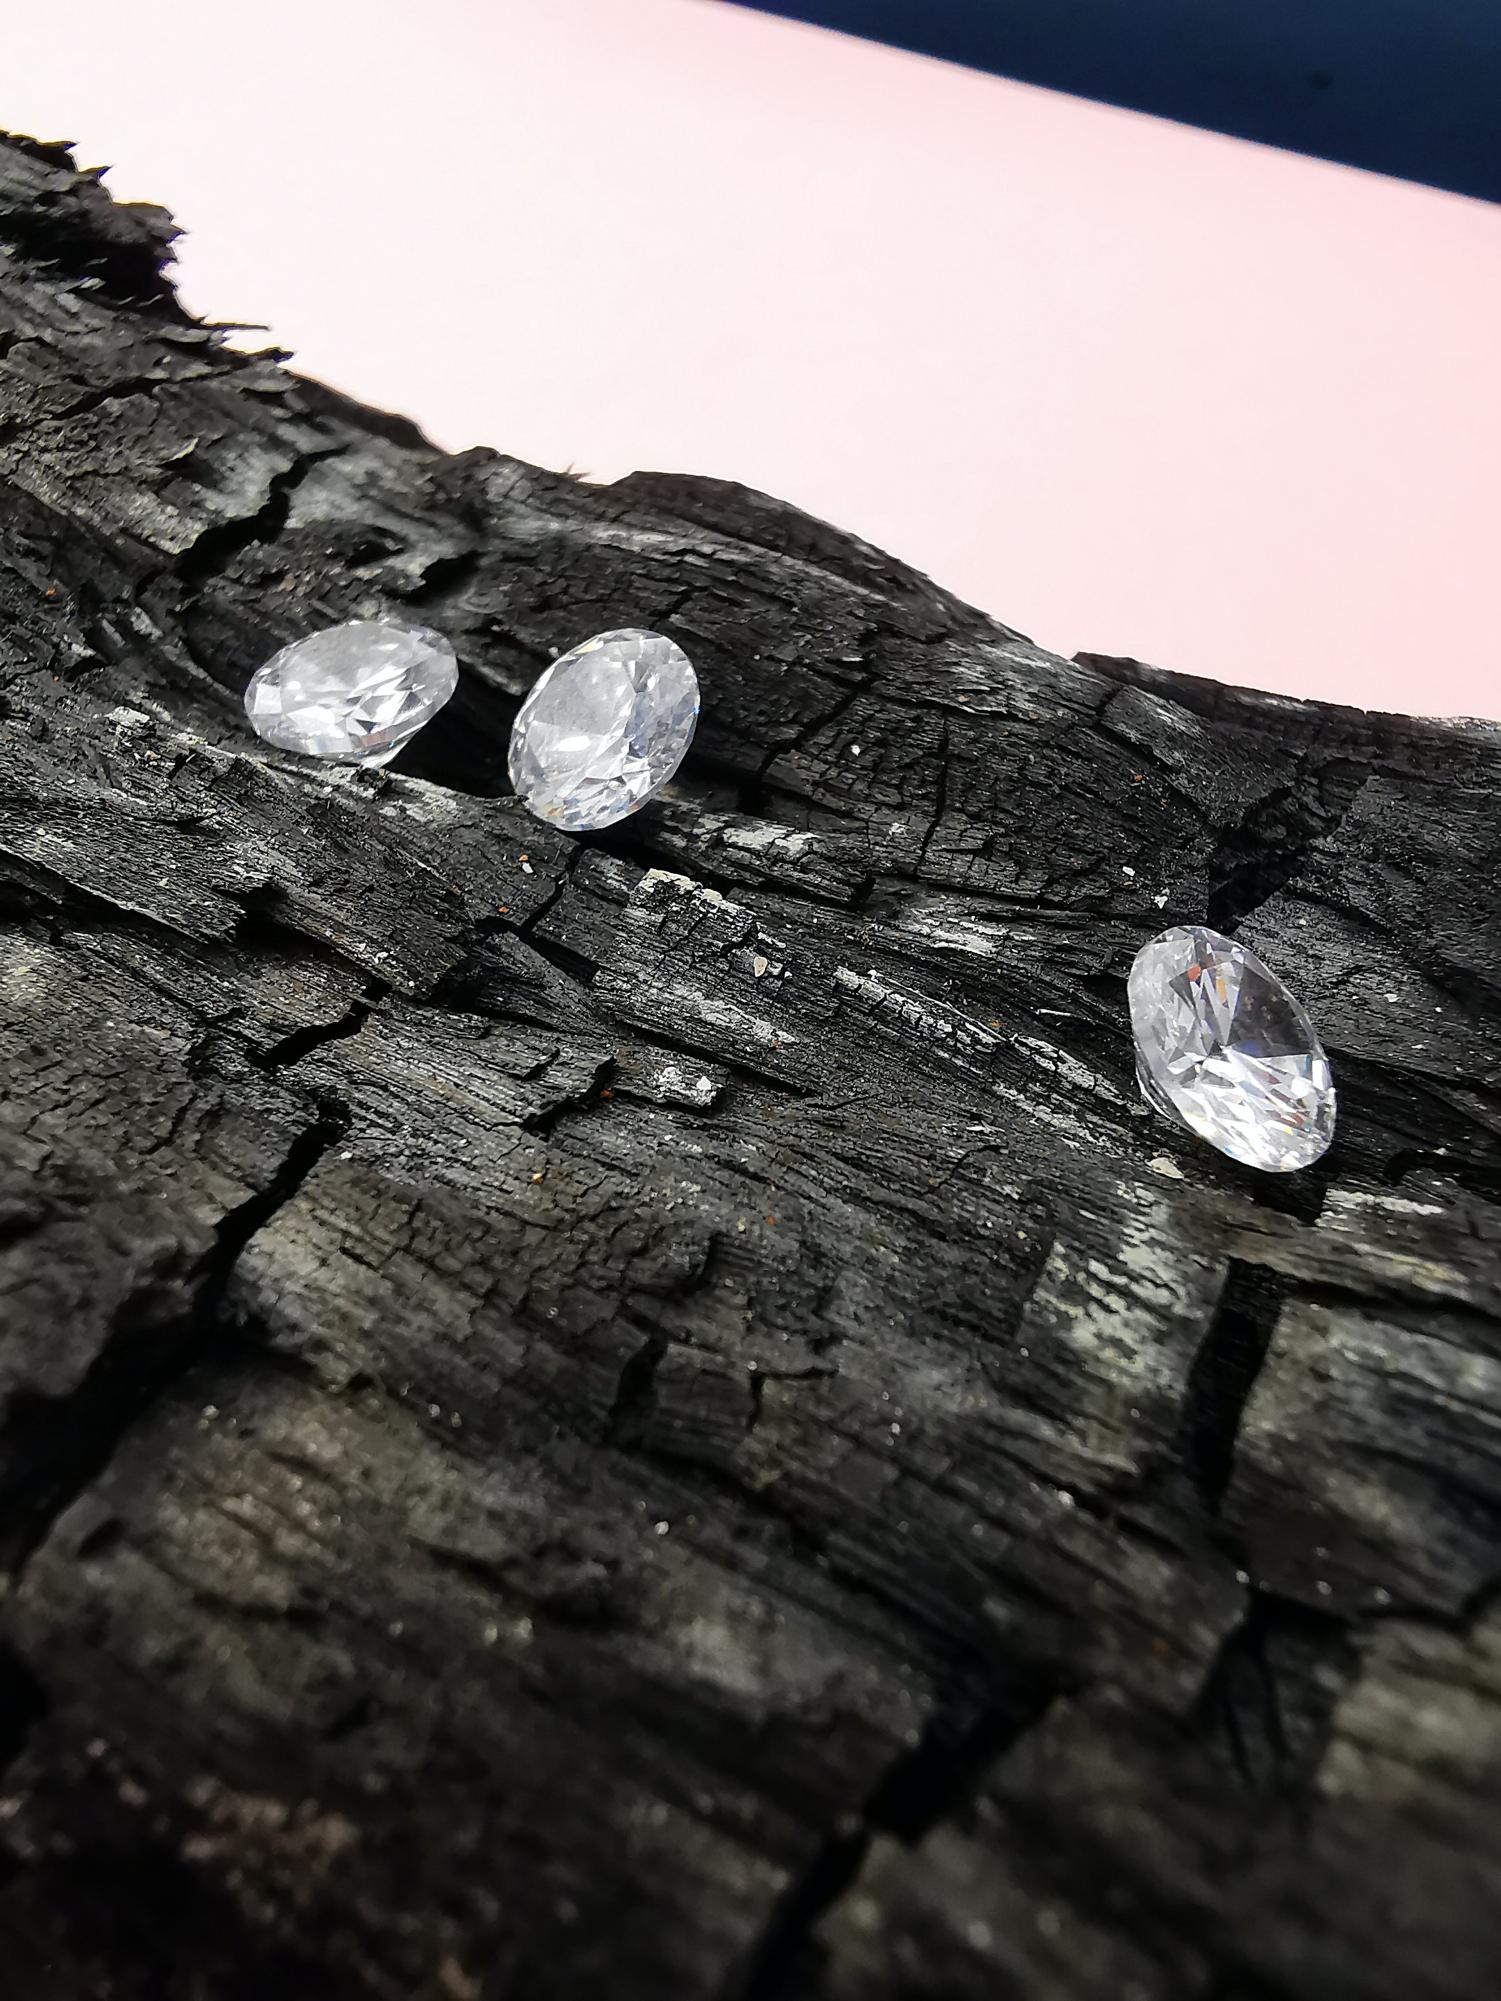 Diamonds are given Kimberley Process certificates once they are cut and polished, allowing smuggled diamonds to attain the certification despite their true origins. Photo used with permission from Karen Laårk Boshoff on Pexels.